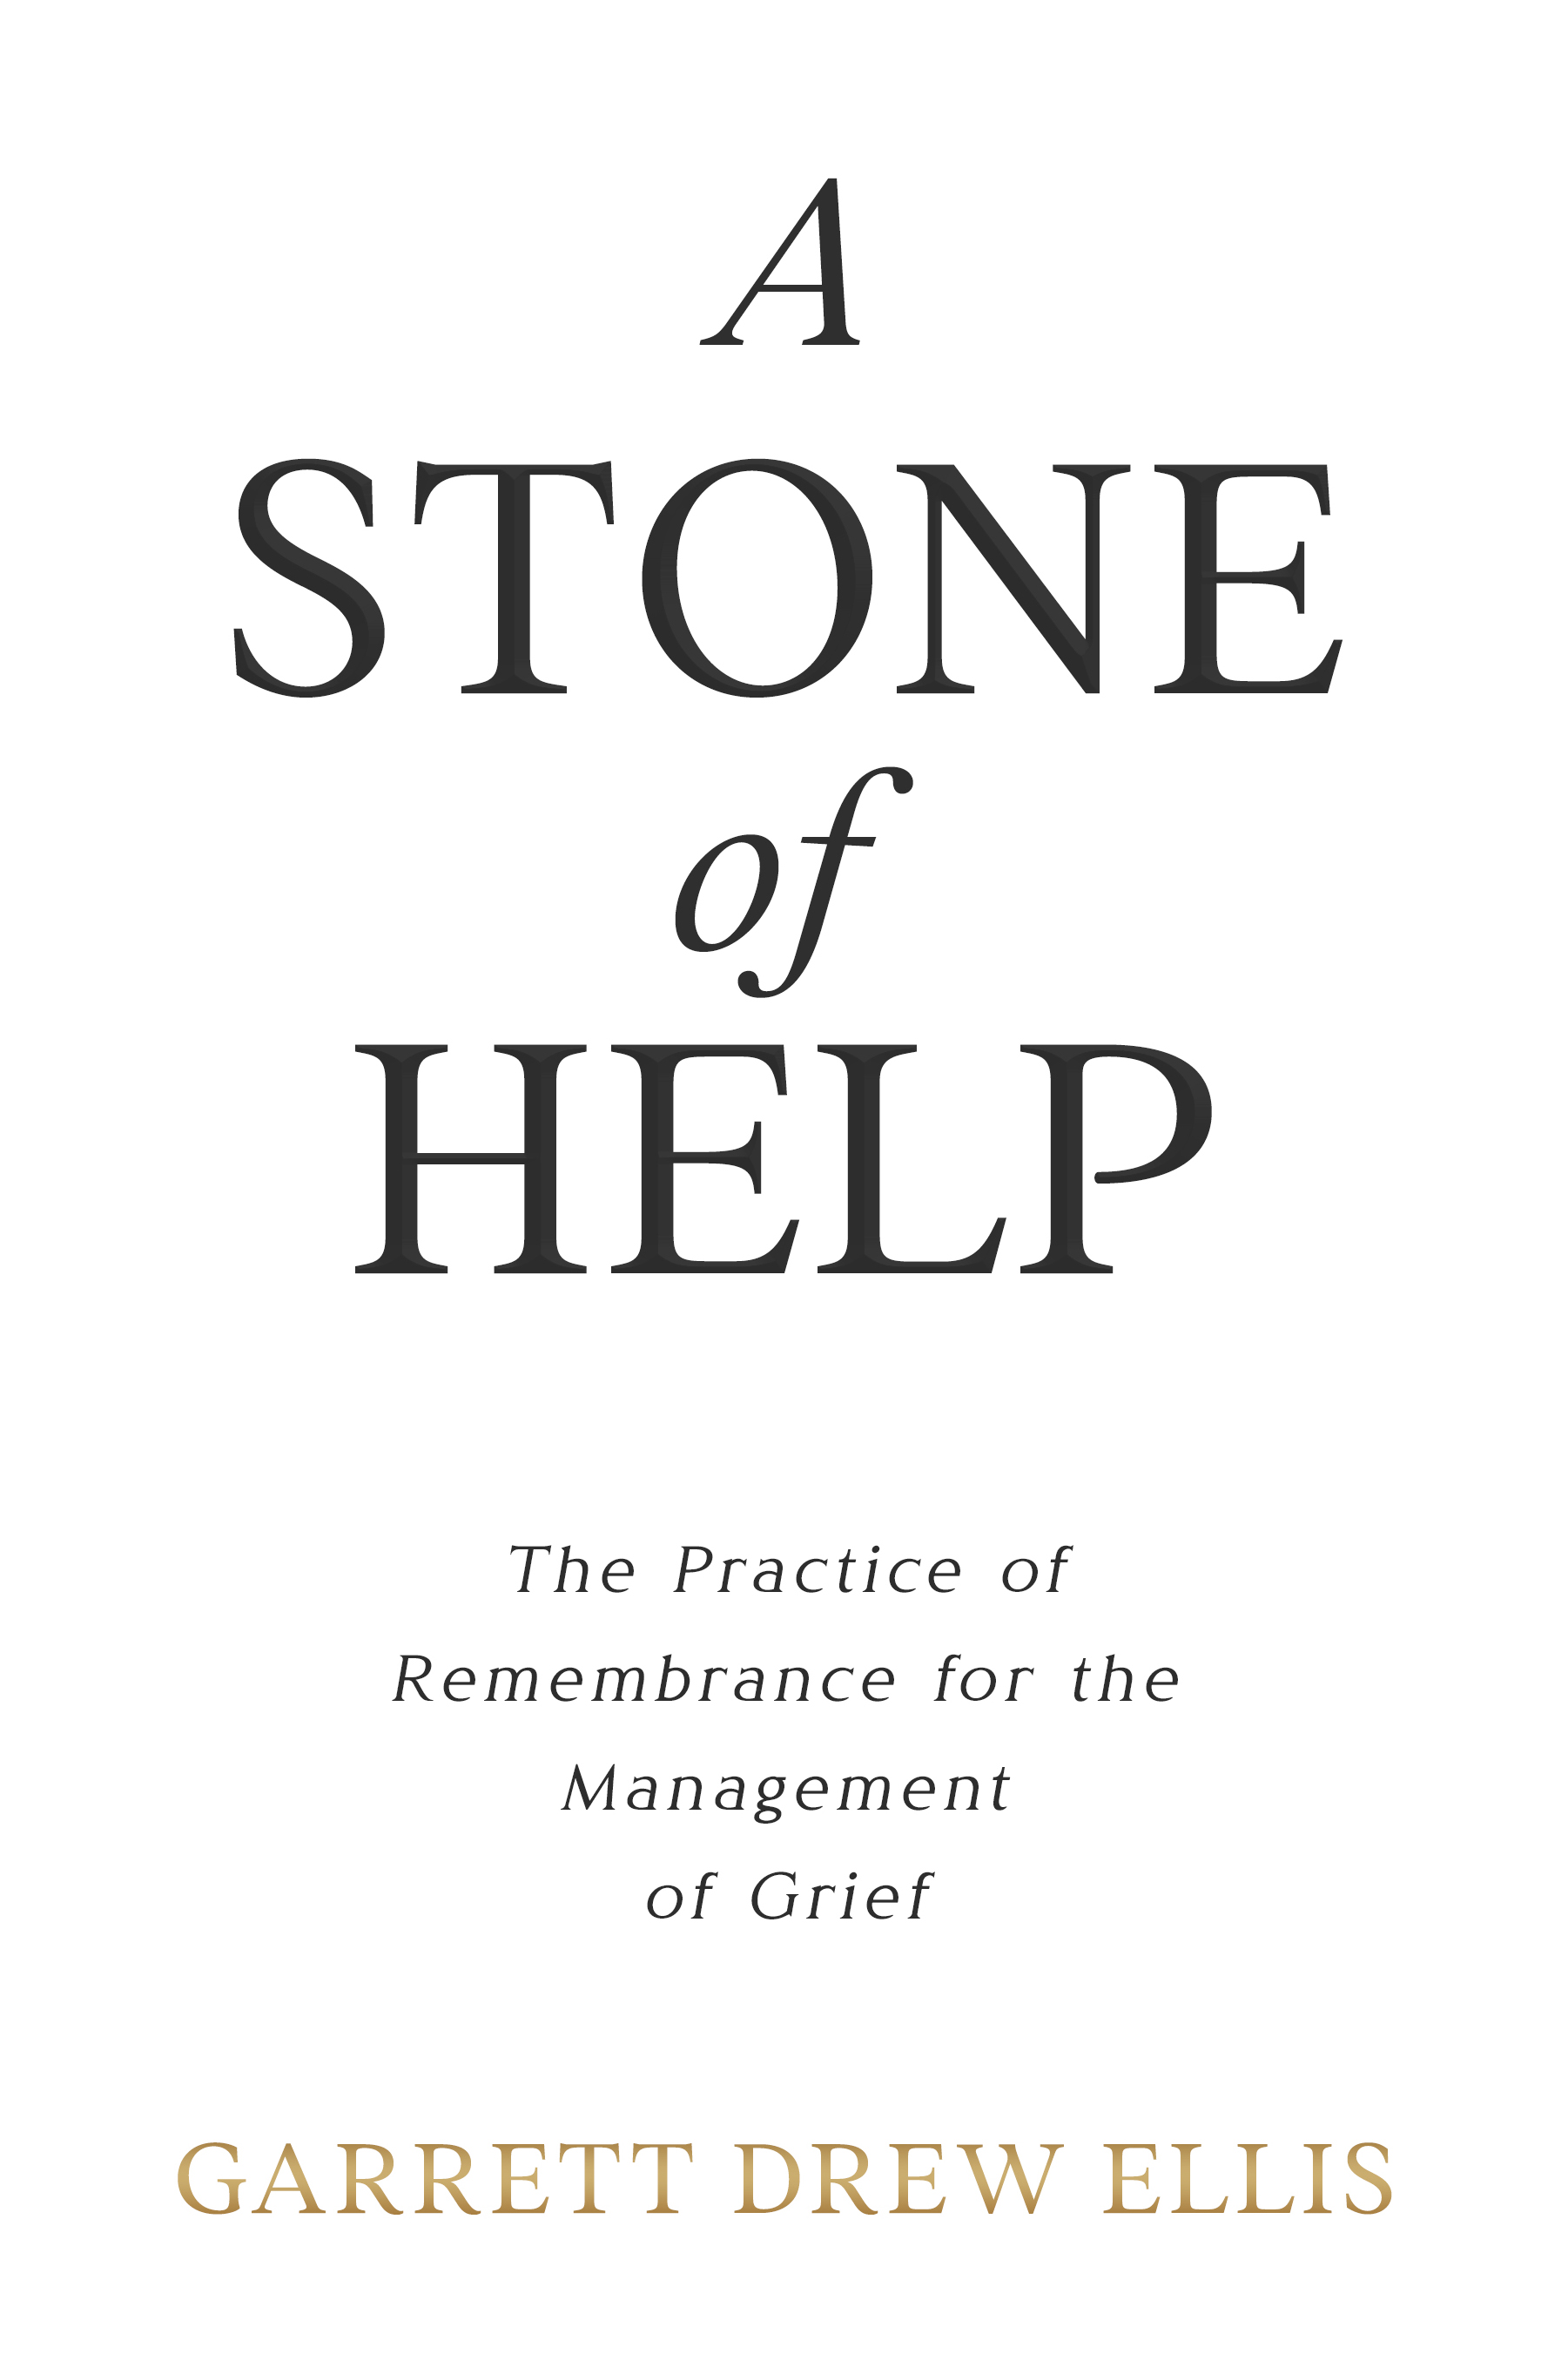 Book Cover for A Stone of Help by Garrett Drew Ellis